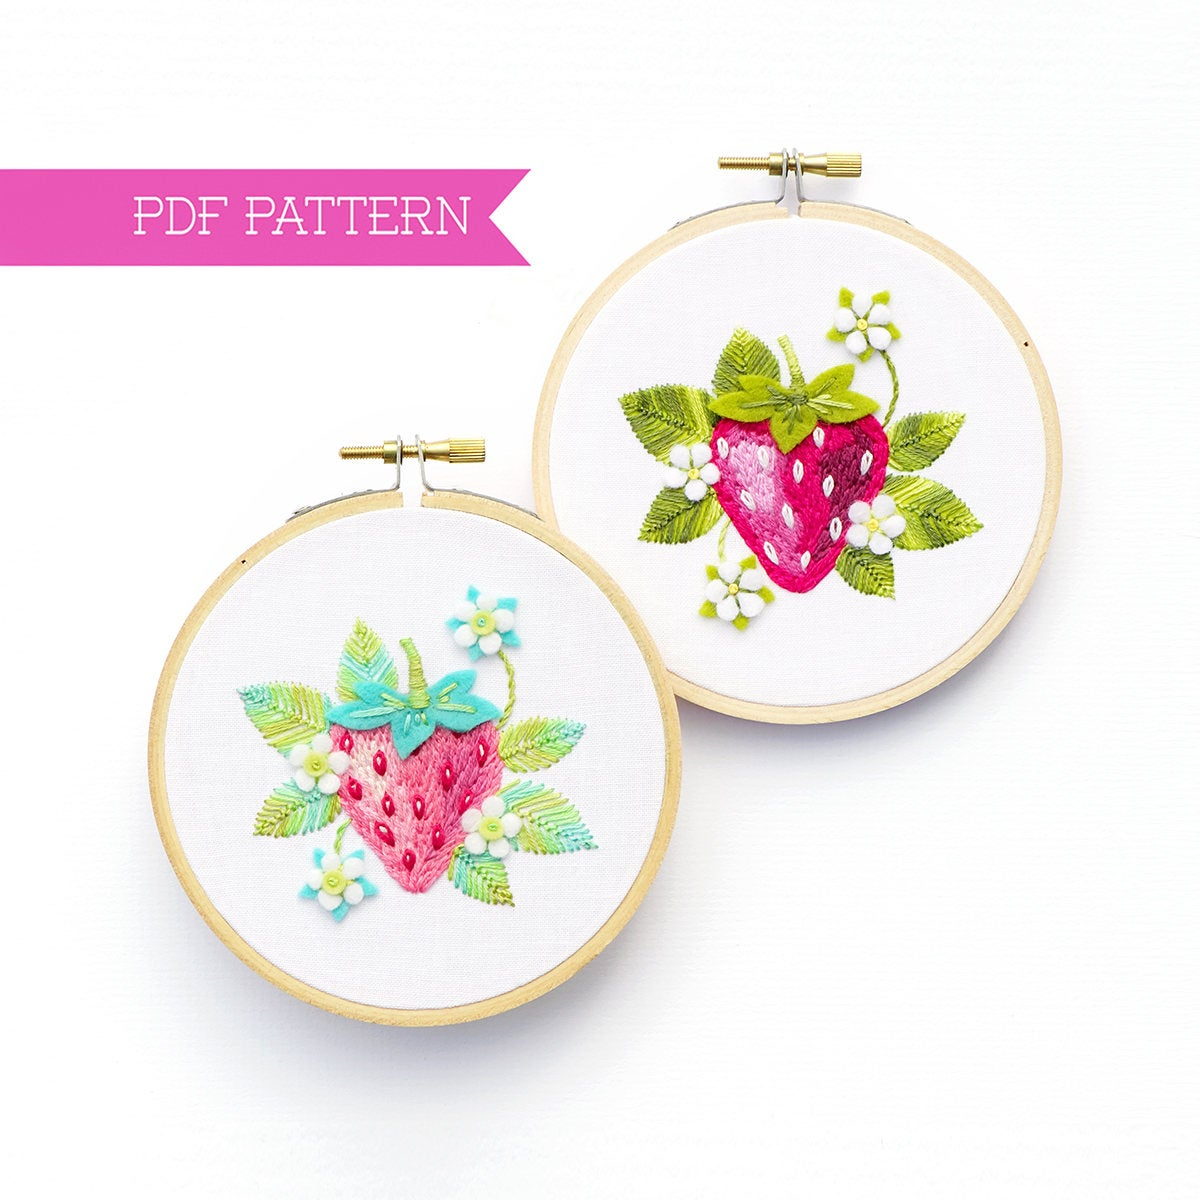 Embroidery By Hand Patterns Embroidery Pattern Pdf Strawberry Pattern Hand Embroidery Patterns Embroidery Pattern Embroidery Pdf Strawberry Hoop Art Food Art